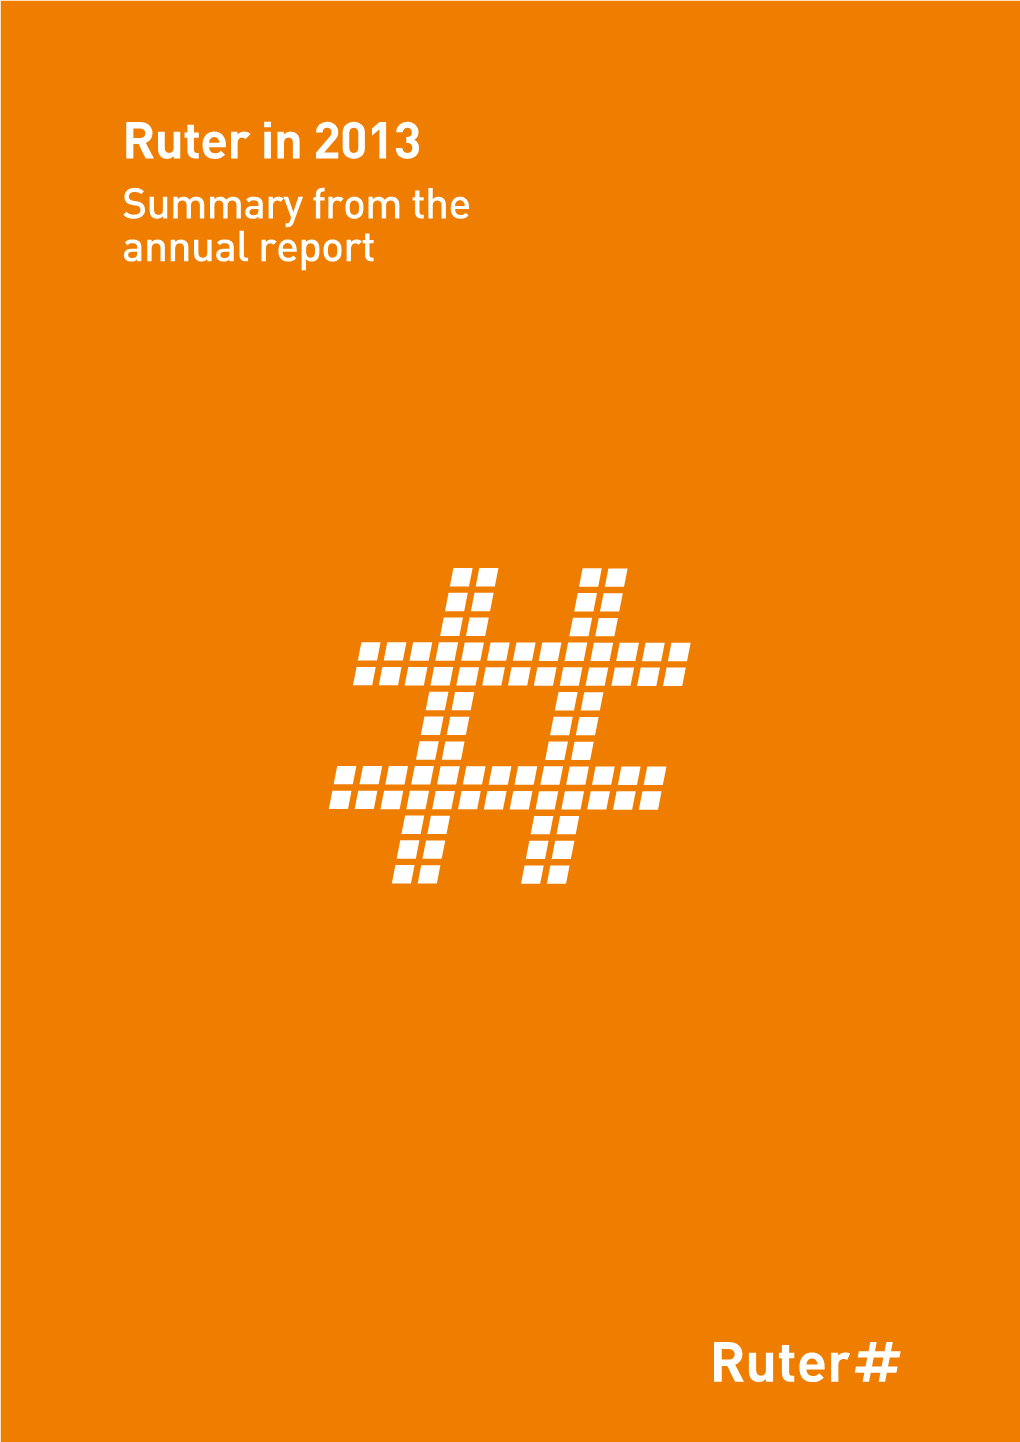 Ruter in 2013 Summary from the Annual Report